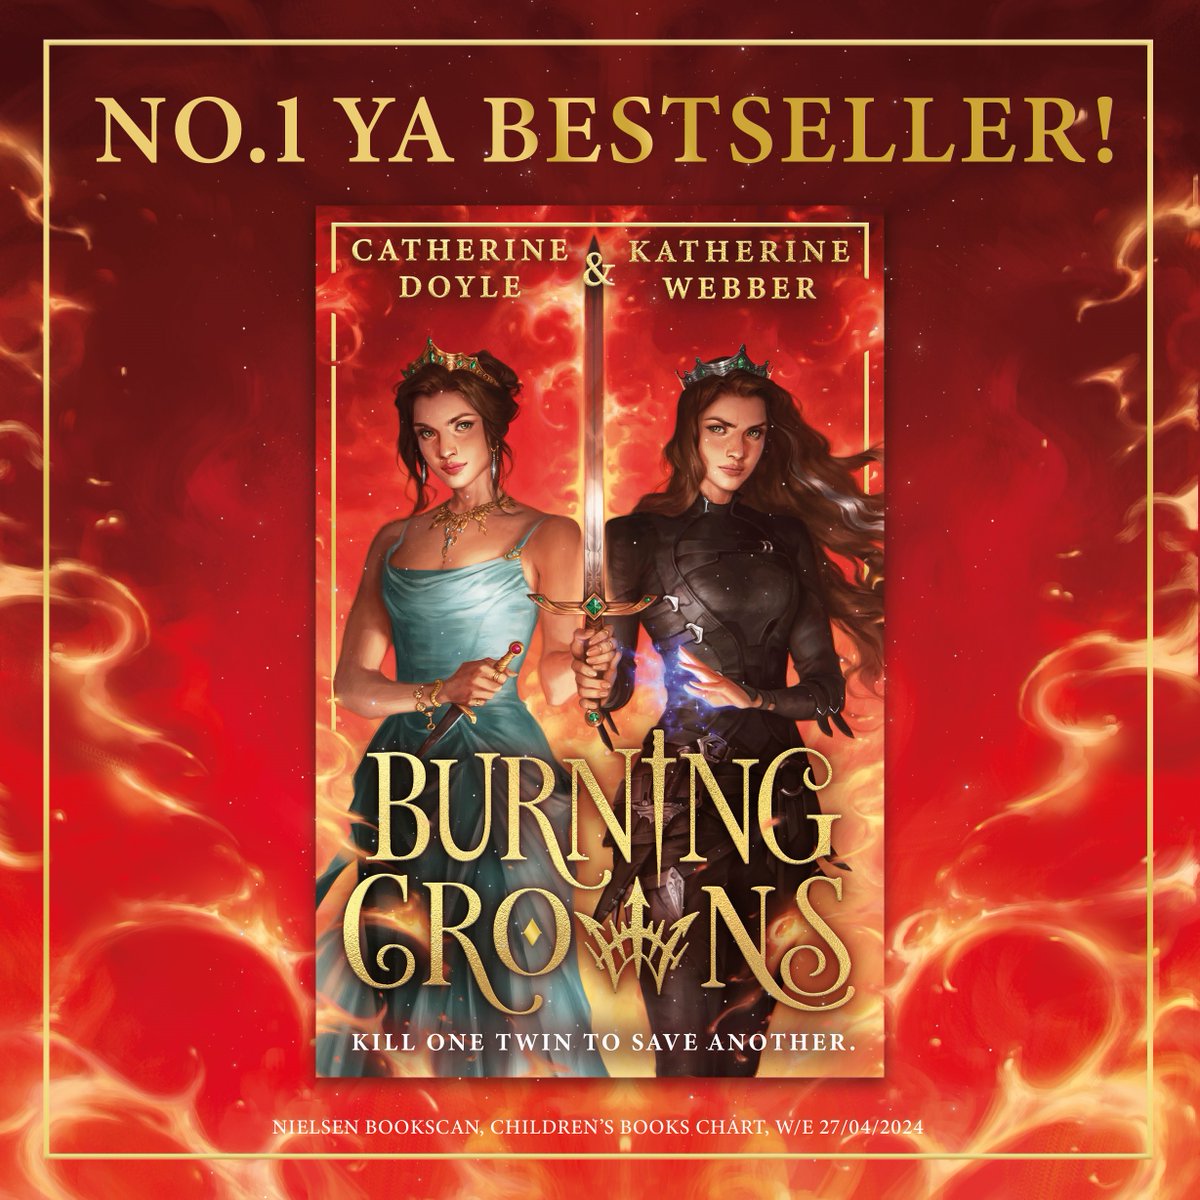 SHE'S NO.1 👑👑 Burning Crowns has been crowned number one in the YA bestseller charts! 😍😍 thank you so much to the incredible fans who made this trilogy go out with a BANG 🥺 @kwebberwrites @doyle_cat we love u forever x ow.ly/g4nN50RtxeP